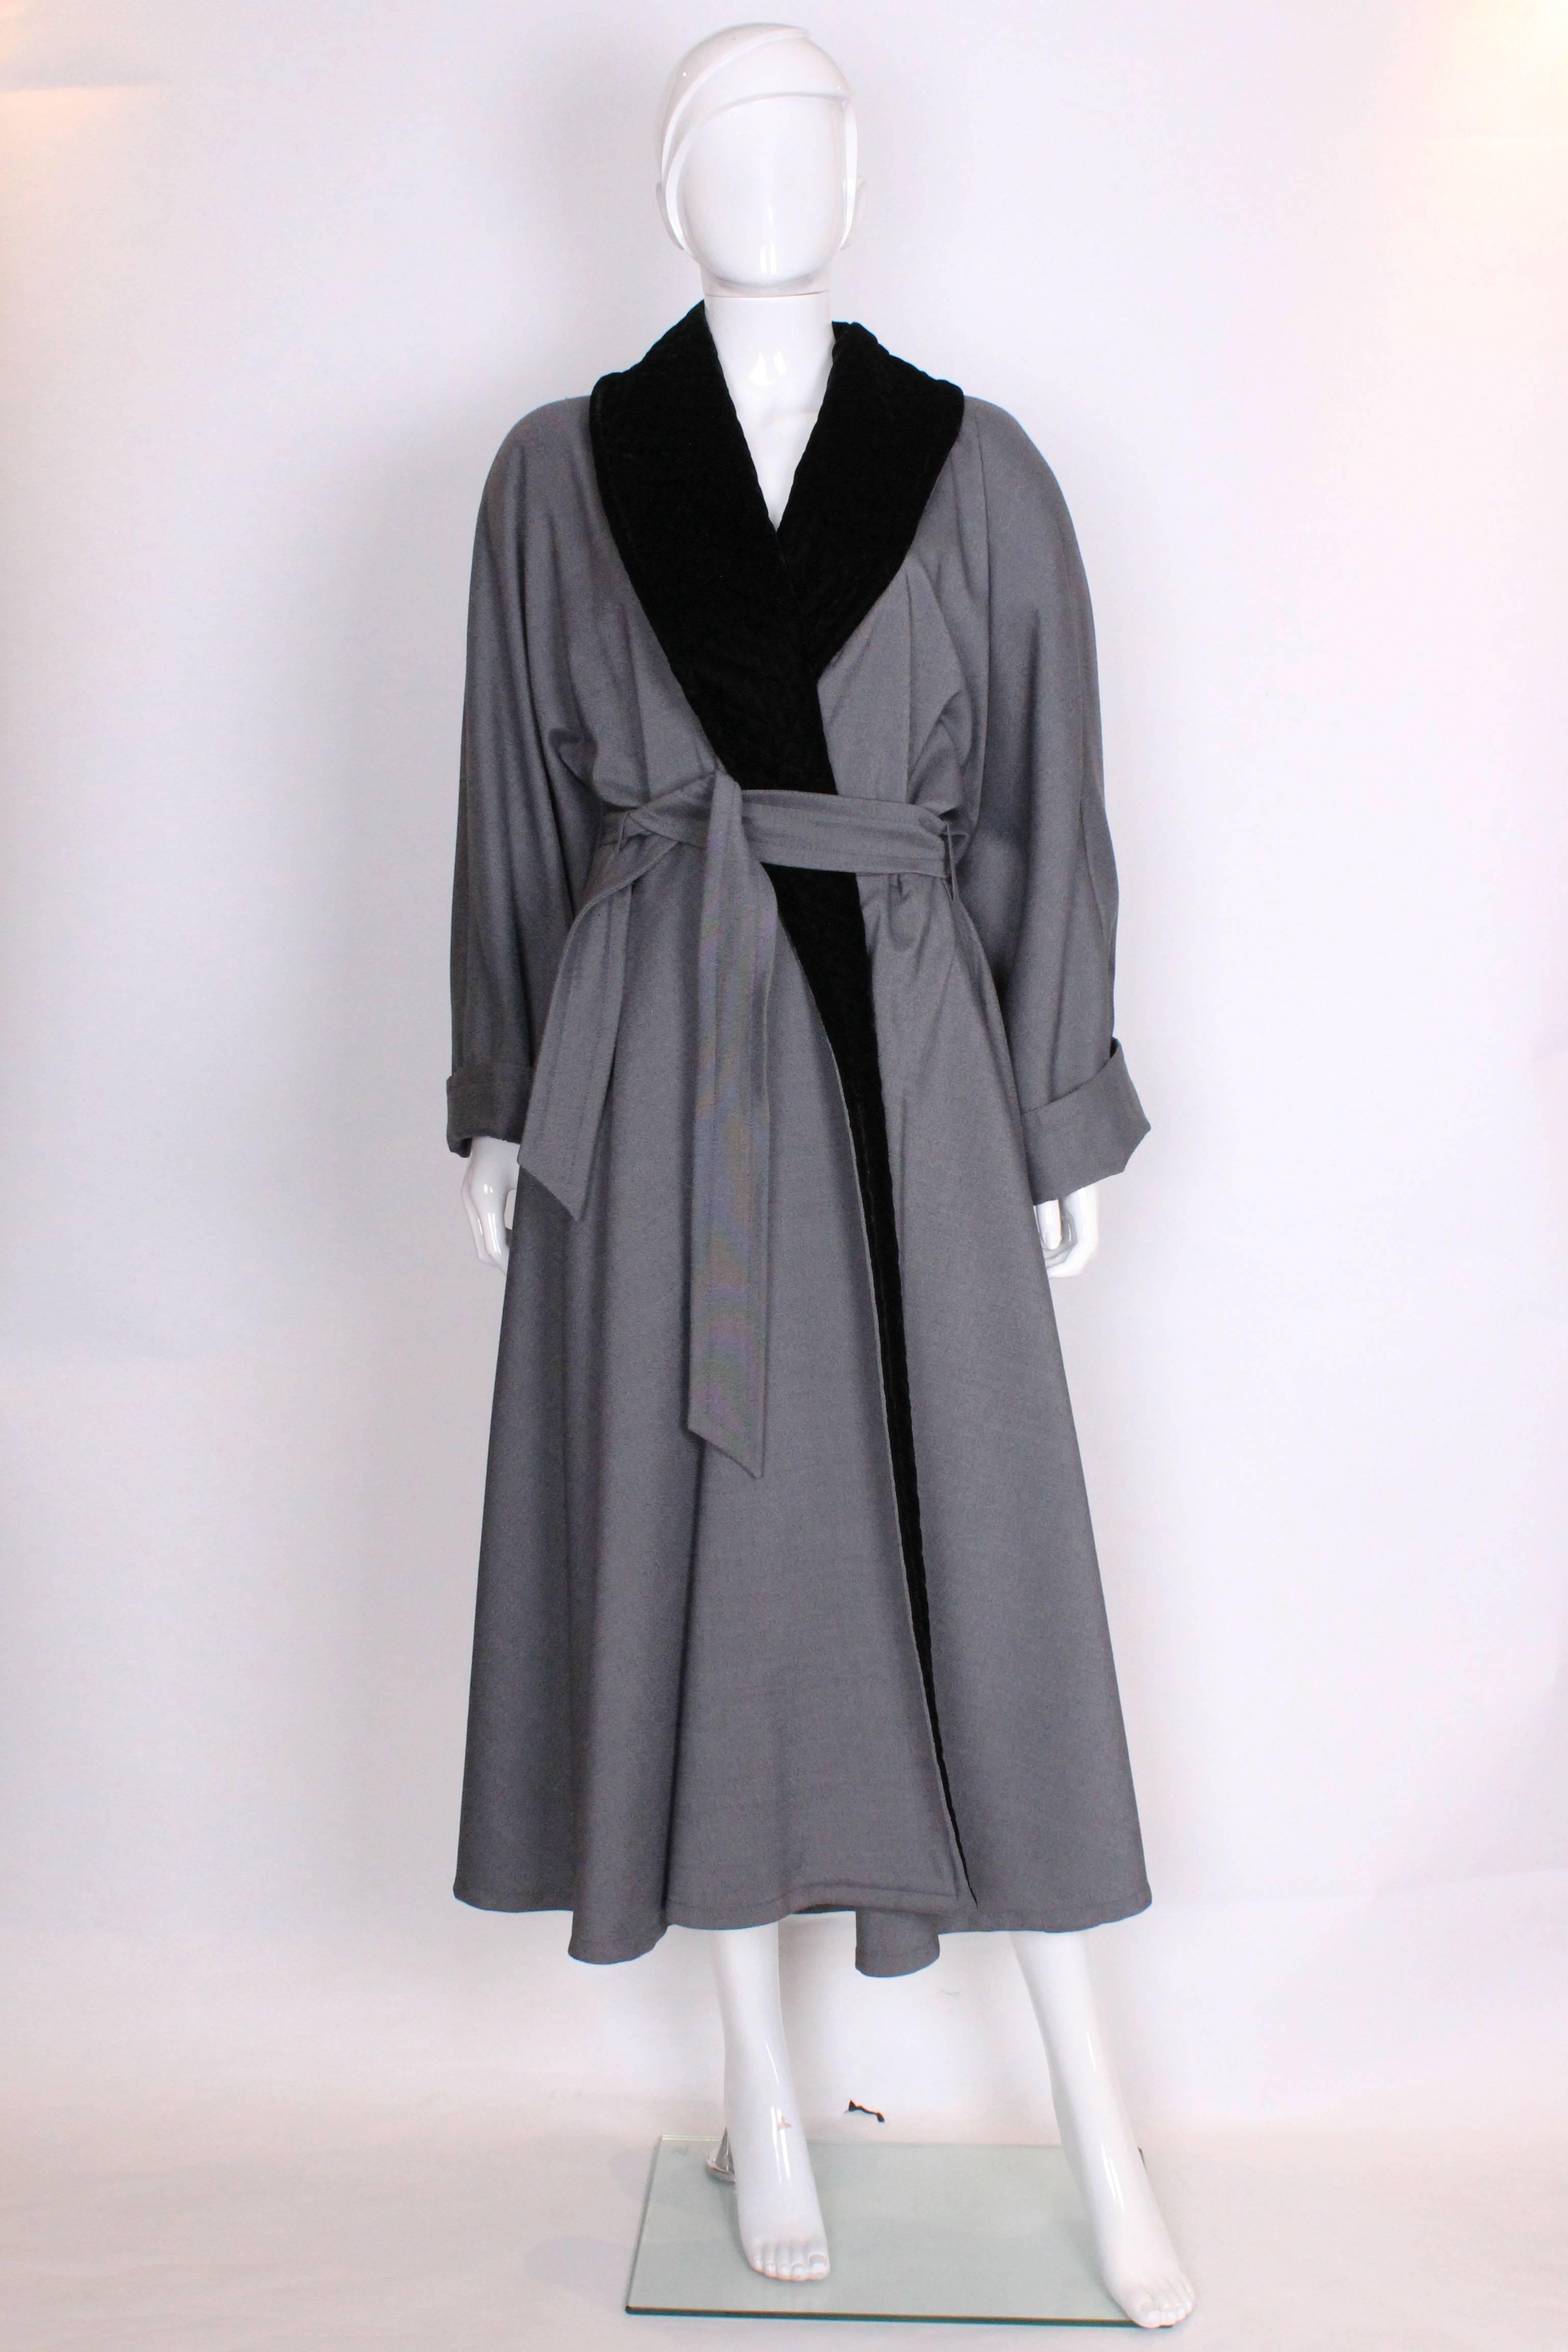 A cosy and chic evening coat by Lanvin Paris.The coat has a wonderful full skirt and so will easily cover most party frocks.The coat is a speckled black, white and grey colour, with a shawl collar of black quilted velvet , a panel of which runs down